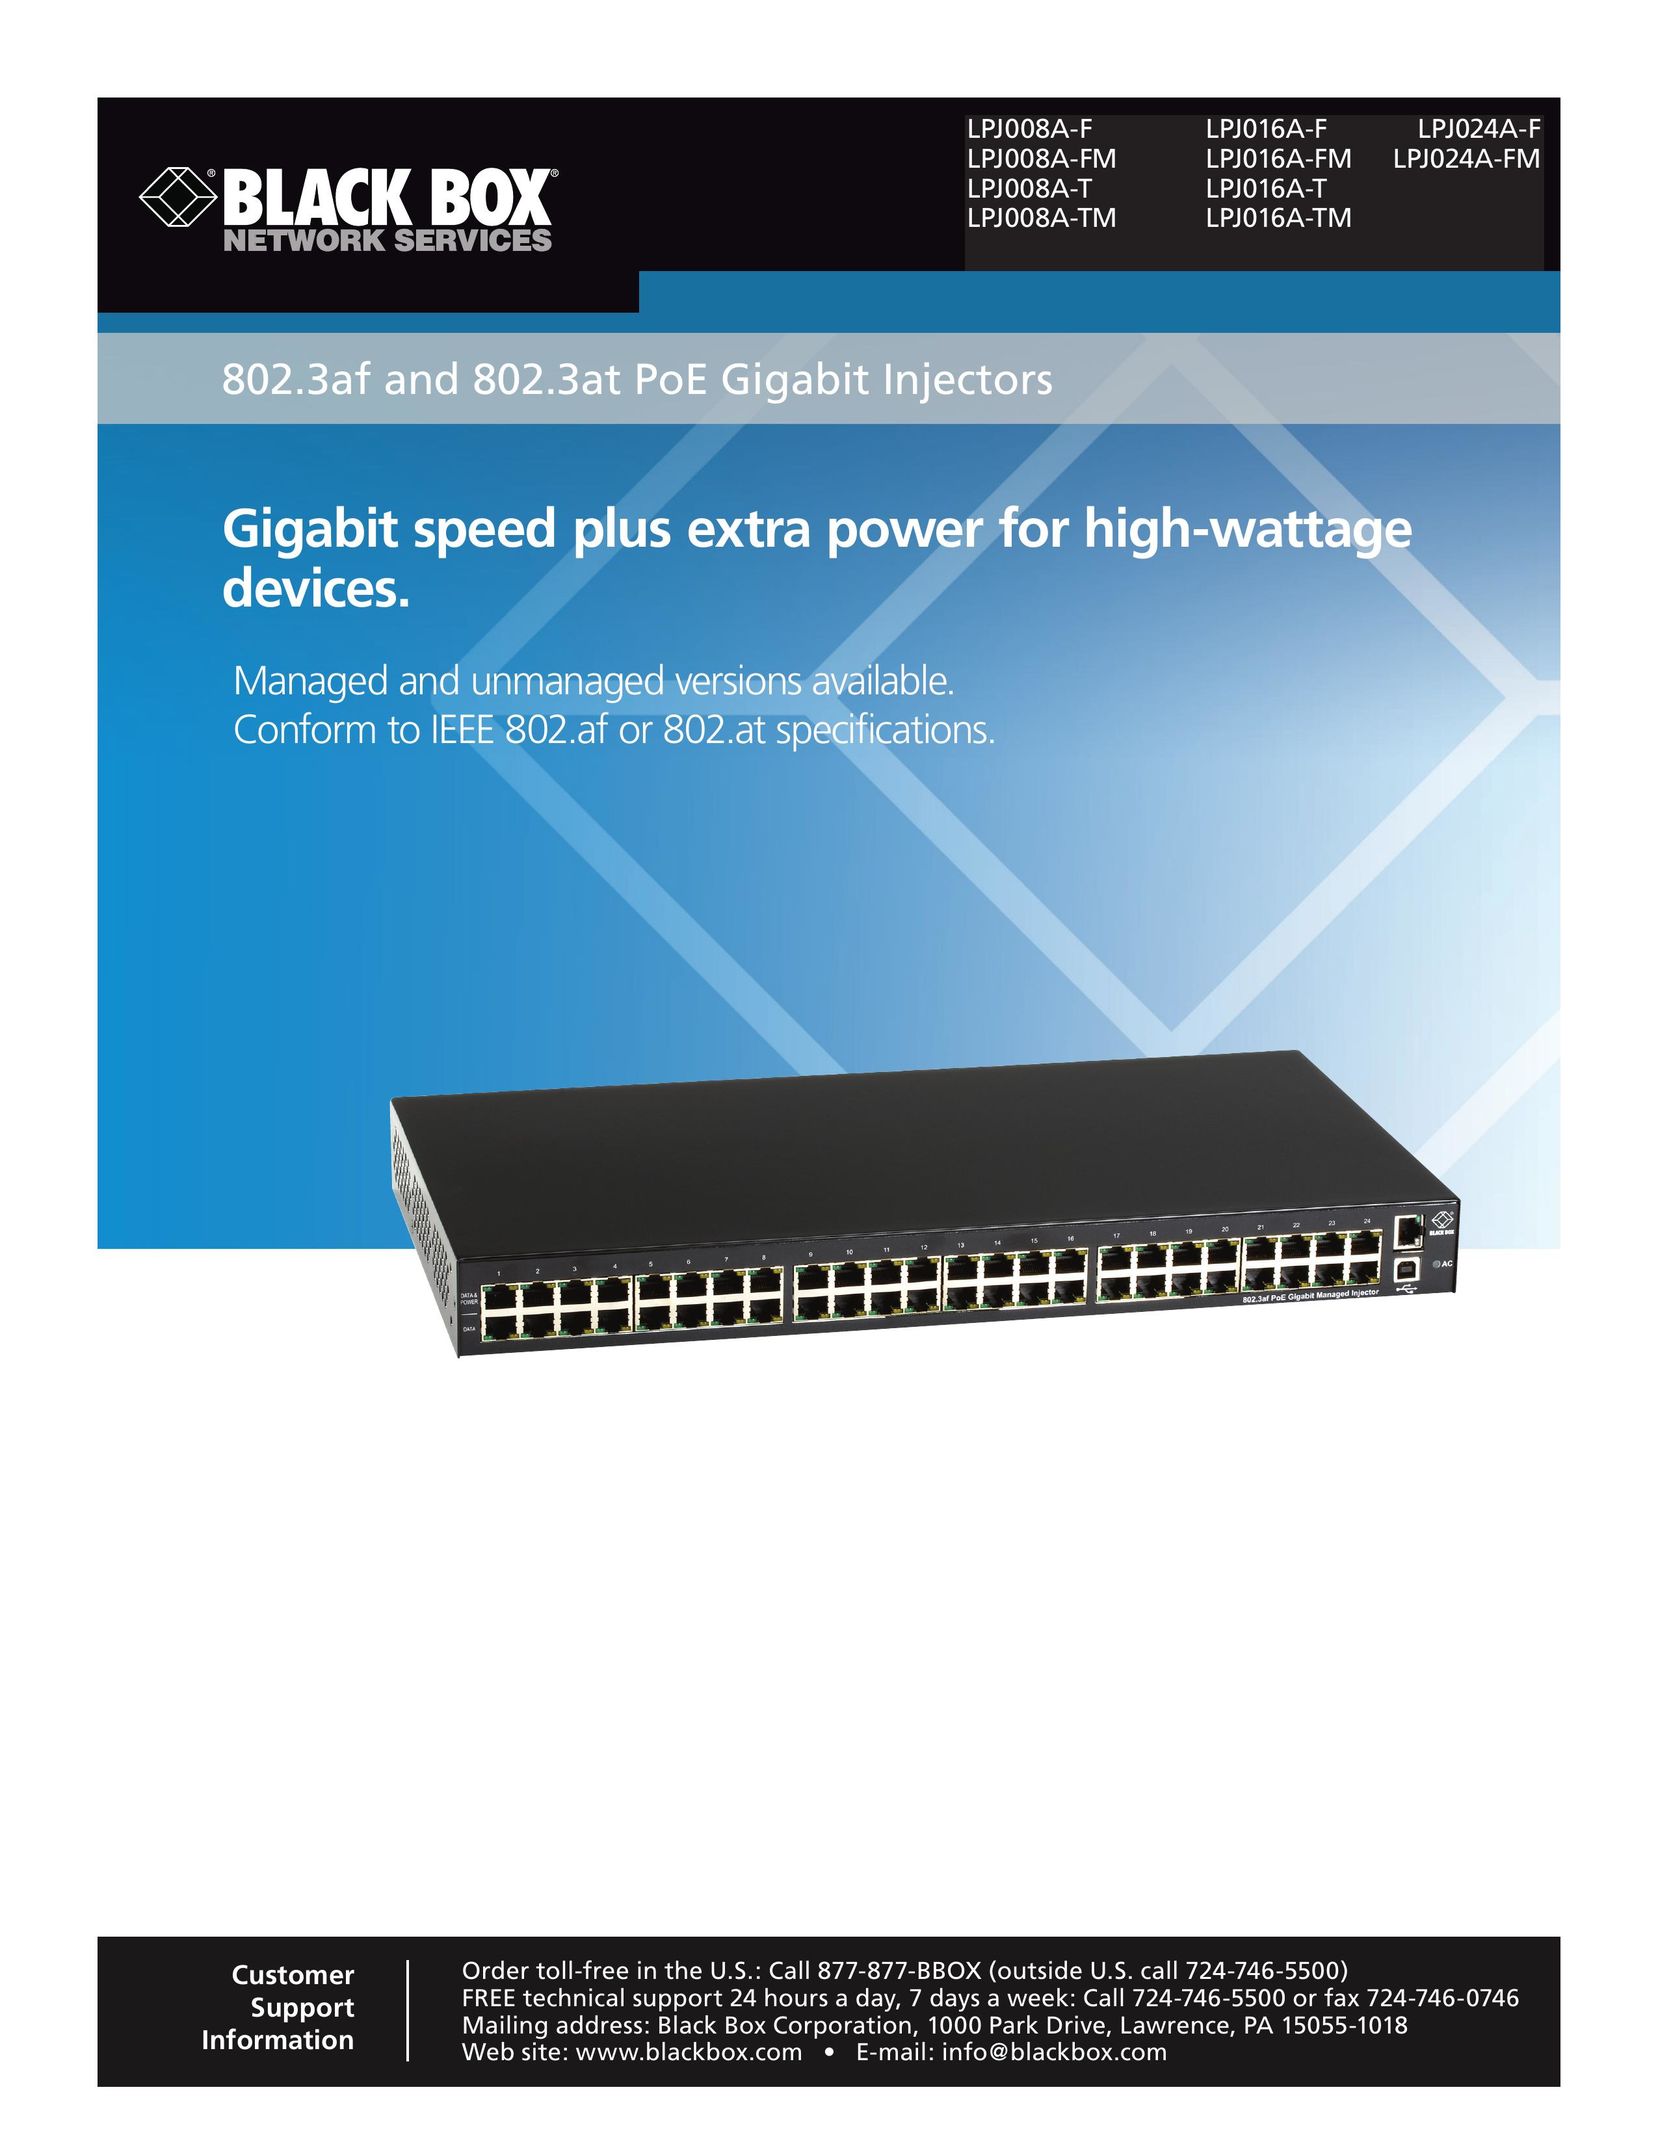 Black Box Gigabit speed plus extra power for high-wattage devices Computer Accessories User Manual